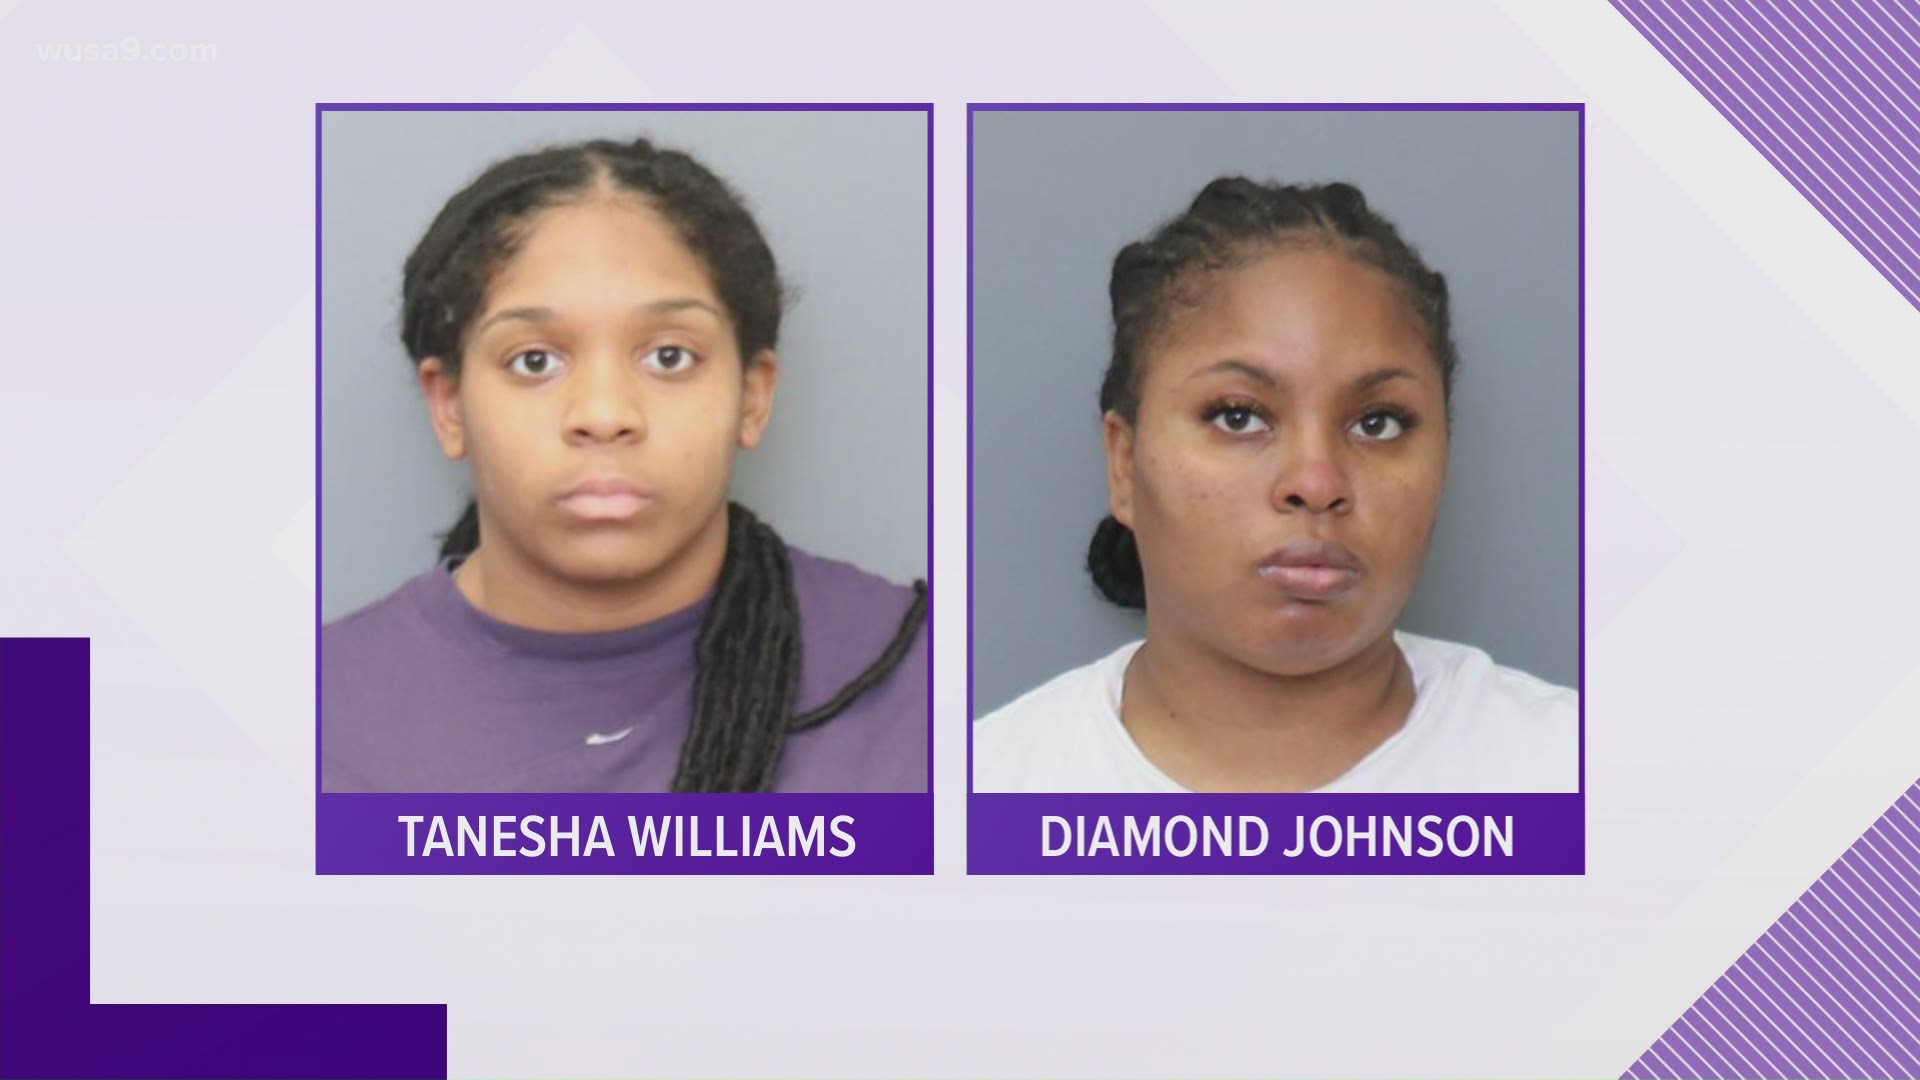 The incident started when Johnson and Williams were in an argument with a Taco Bell employee at a drive-thru window.